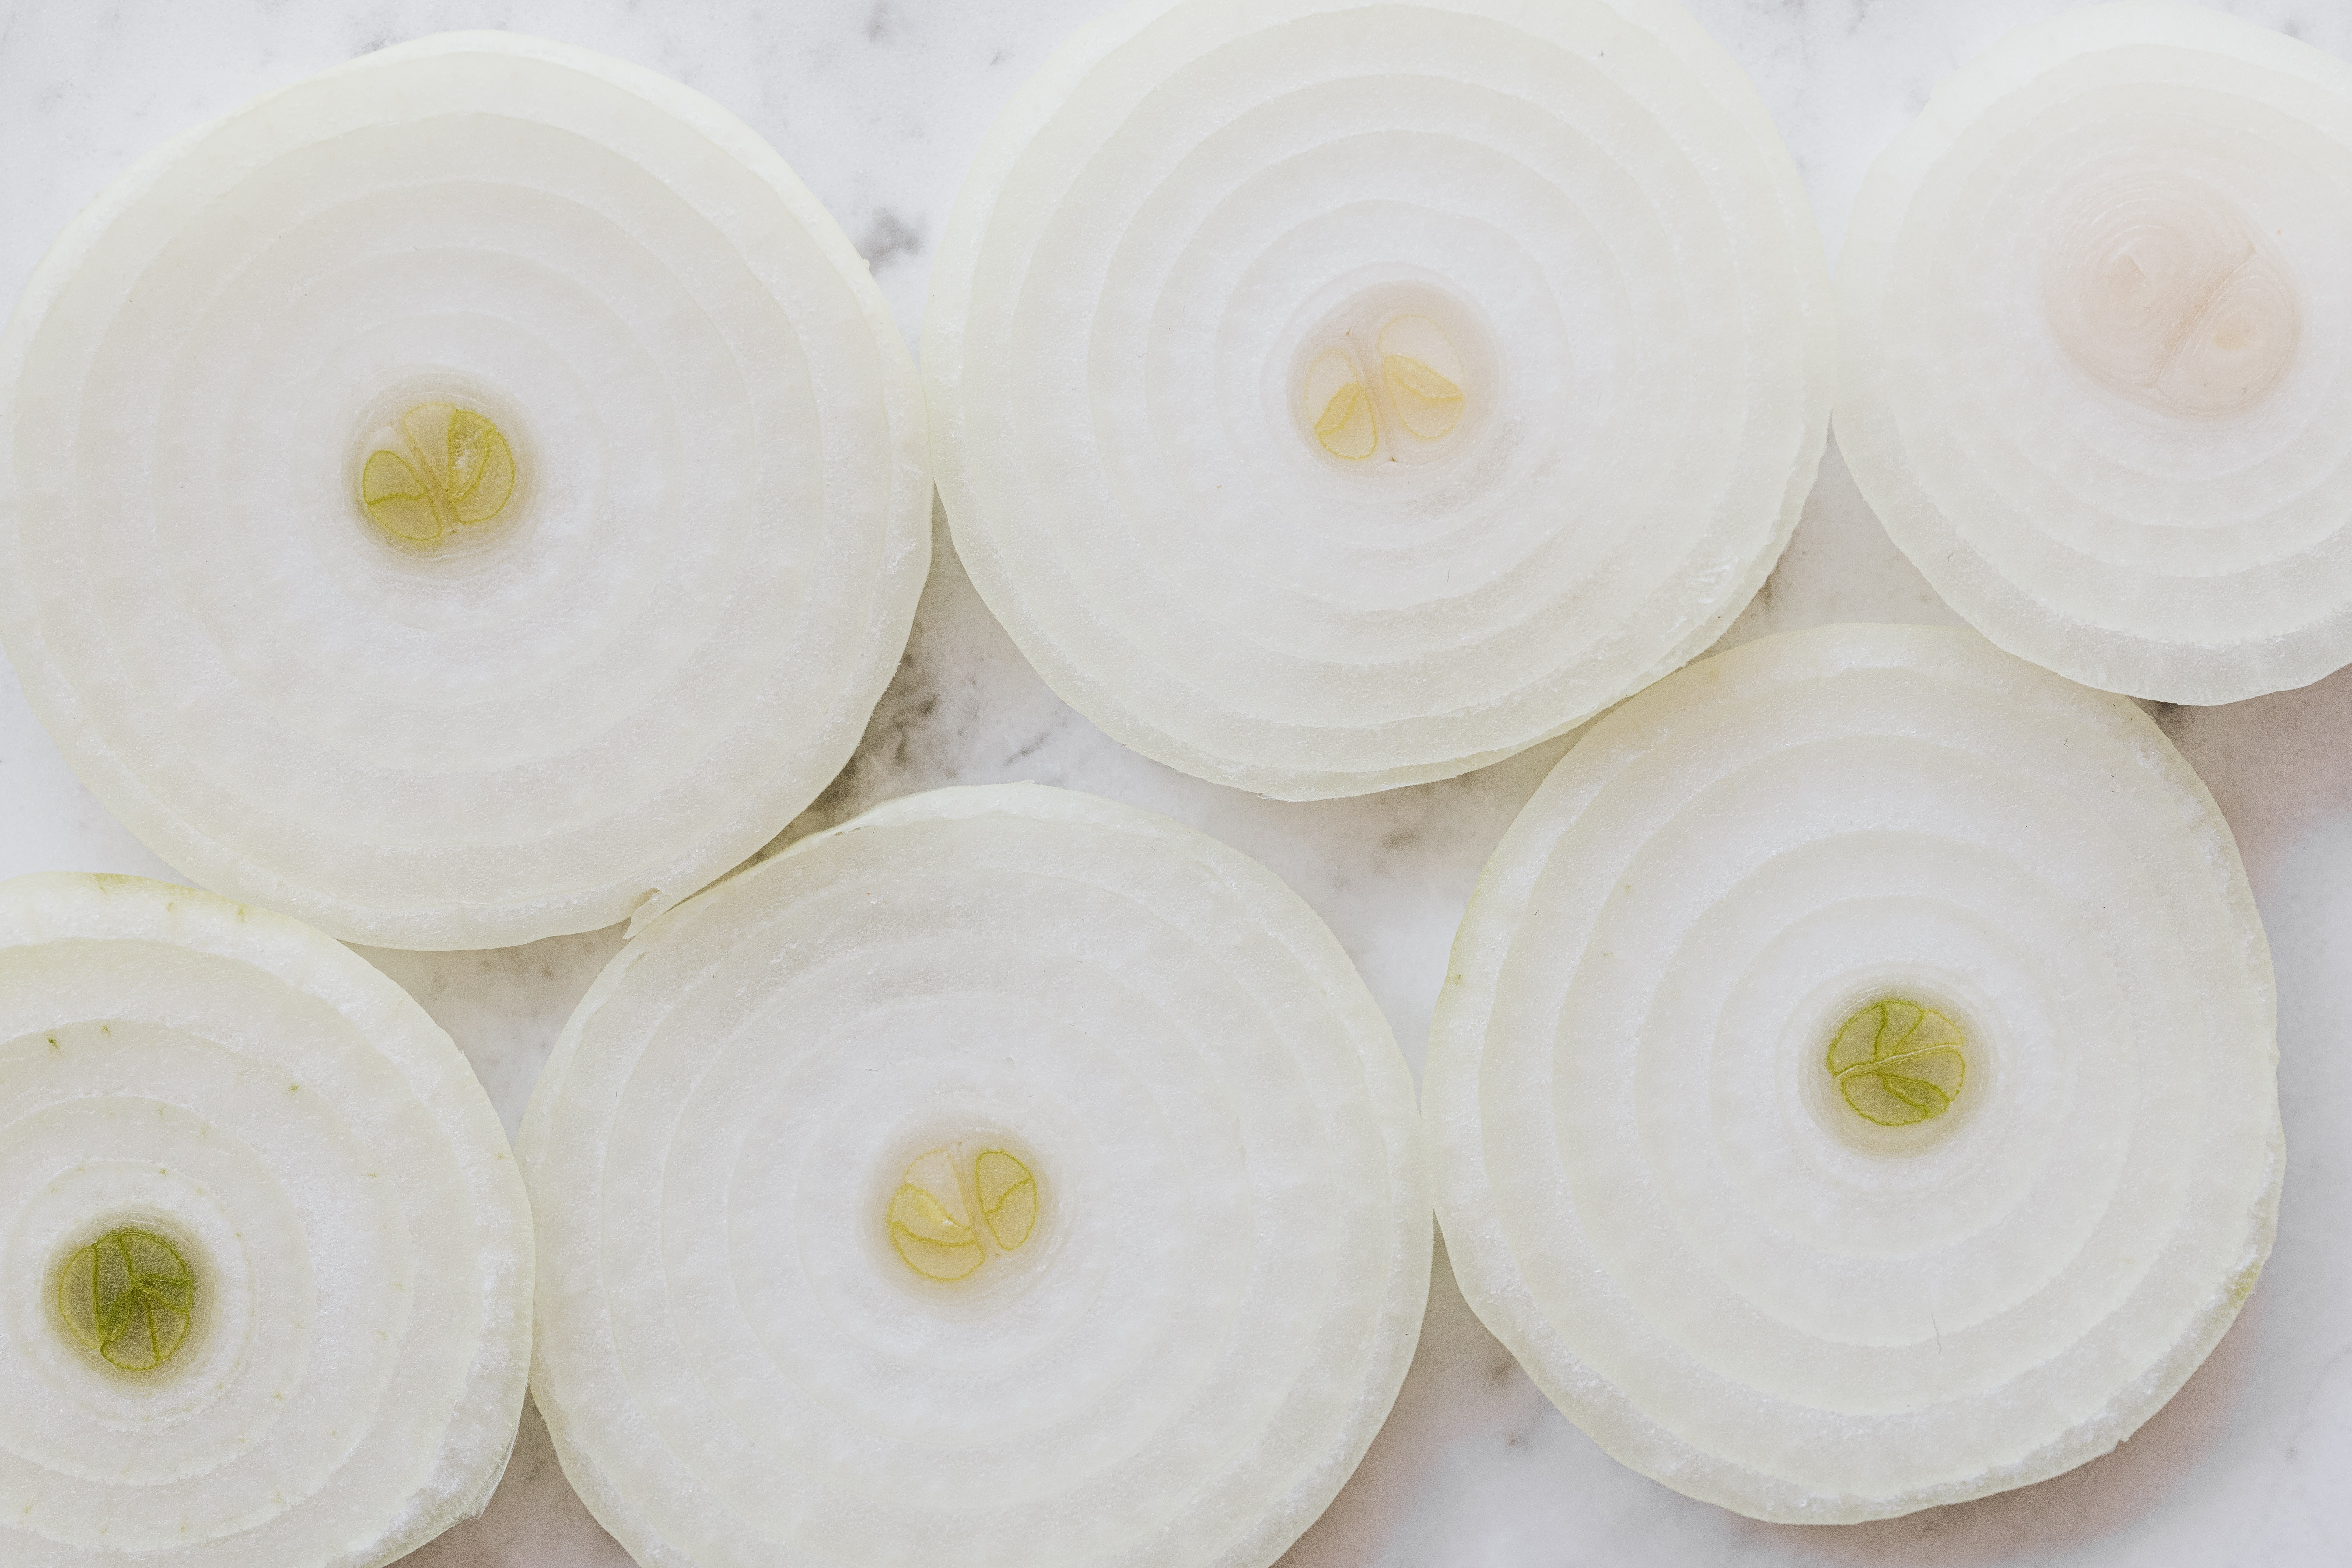 Diabetes can be controlled by drinking onion water